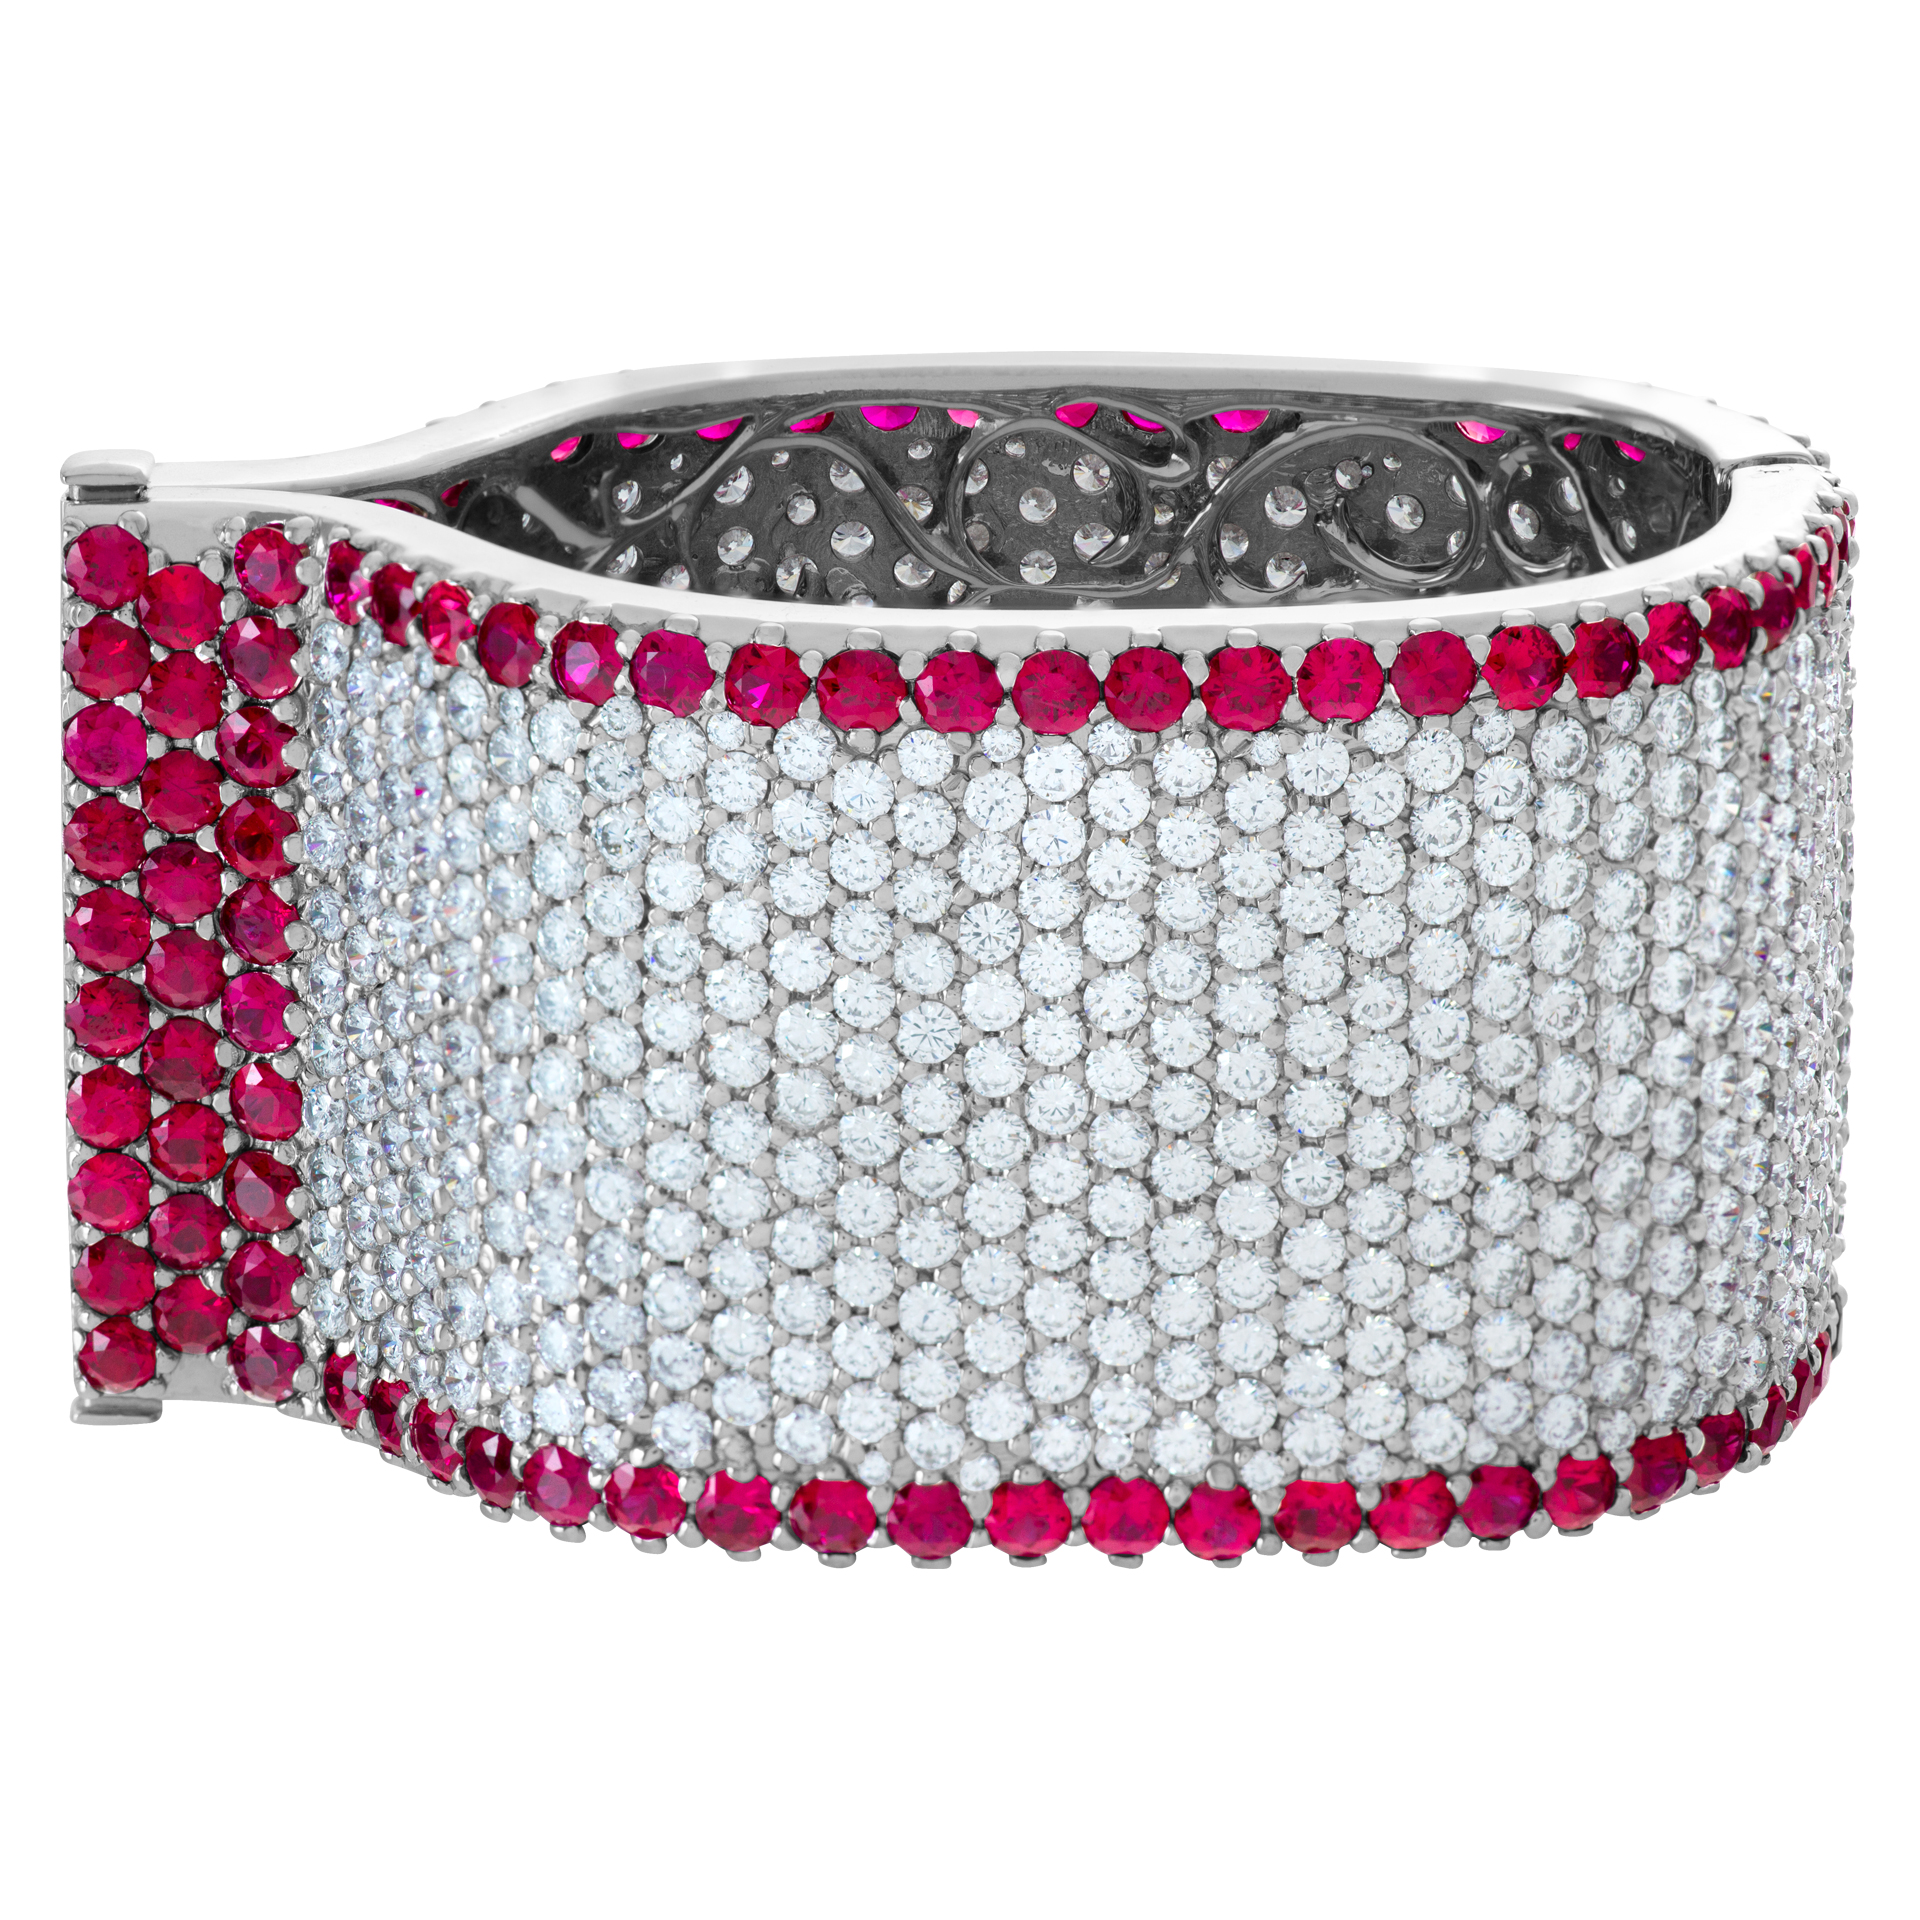 Ruby and diamond bangle in 18k white gold - Over 60 carats round brilliant diamond cut diamonds and 40 carats rubies